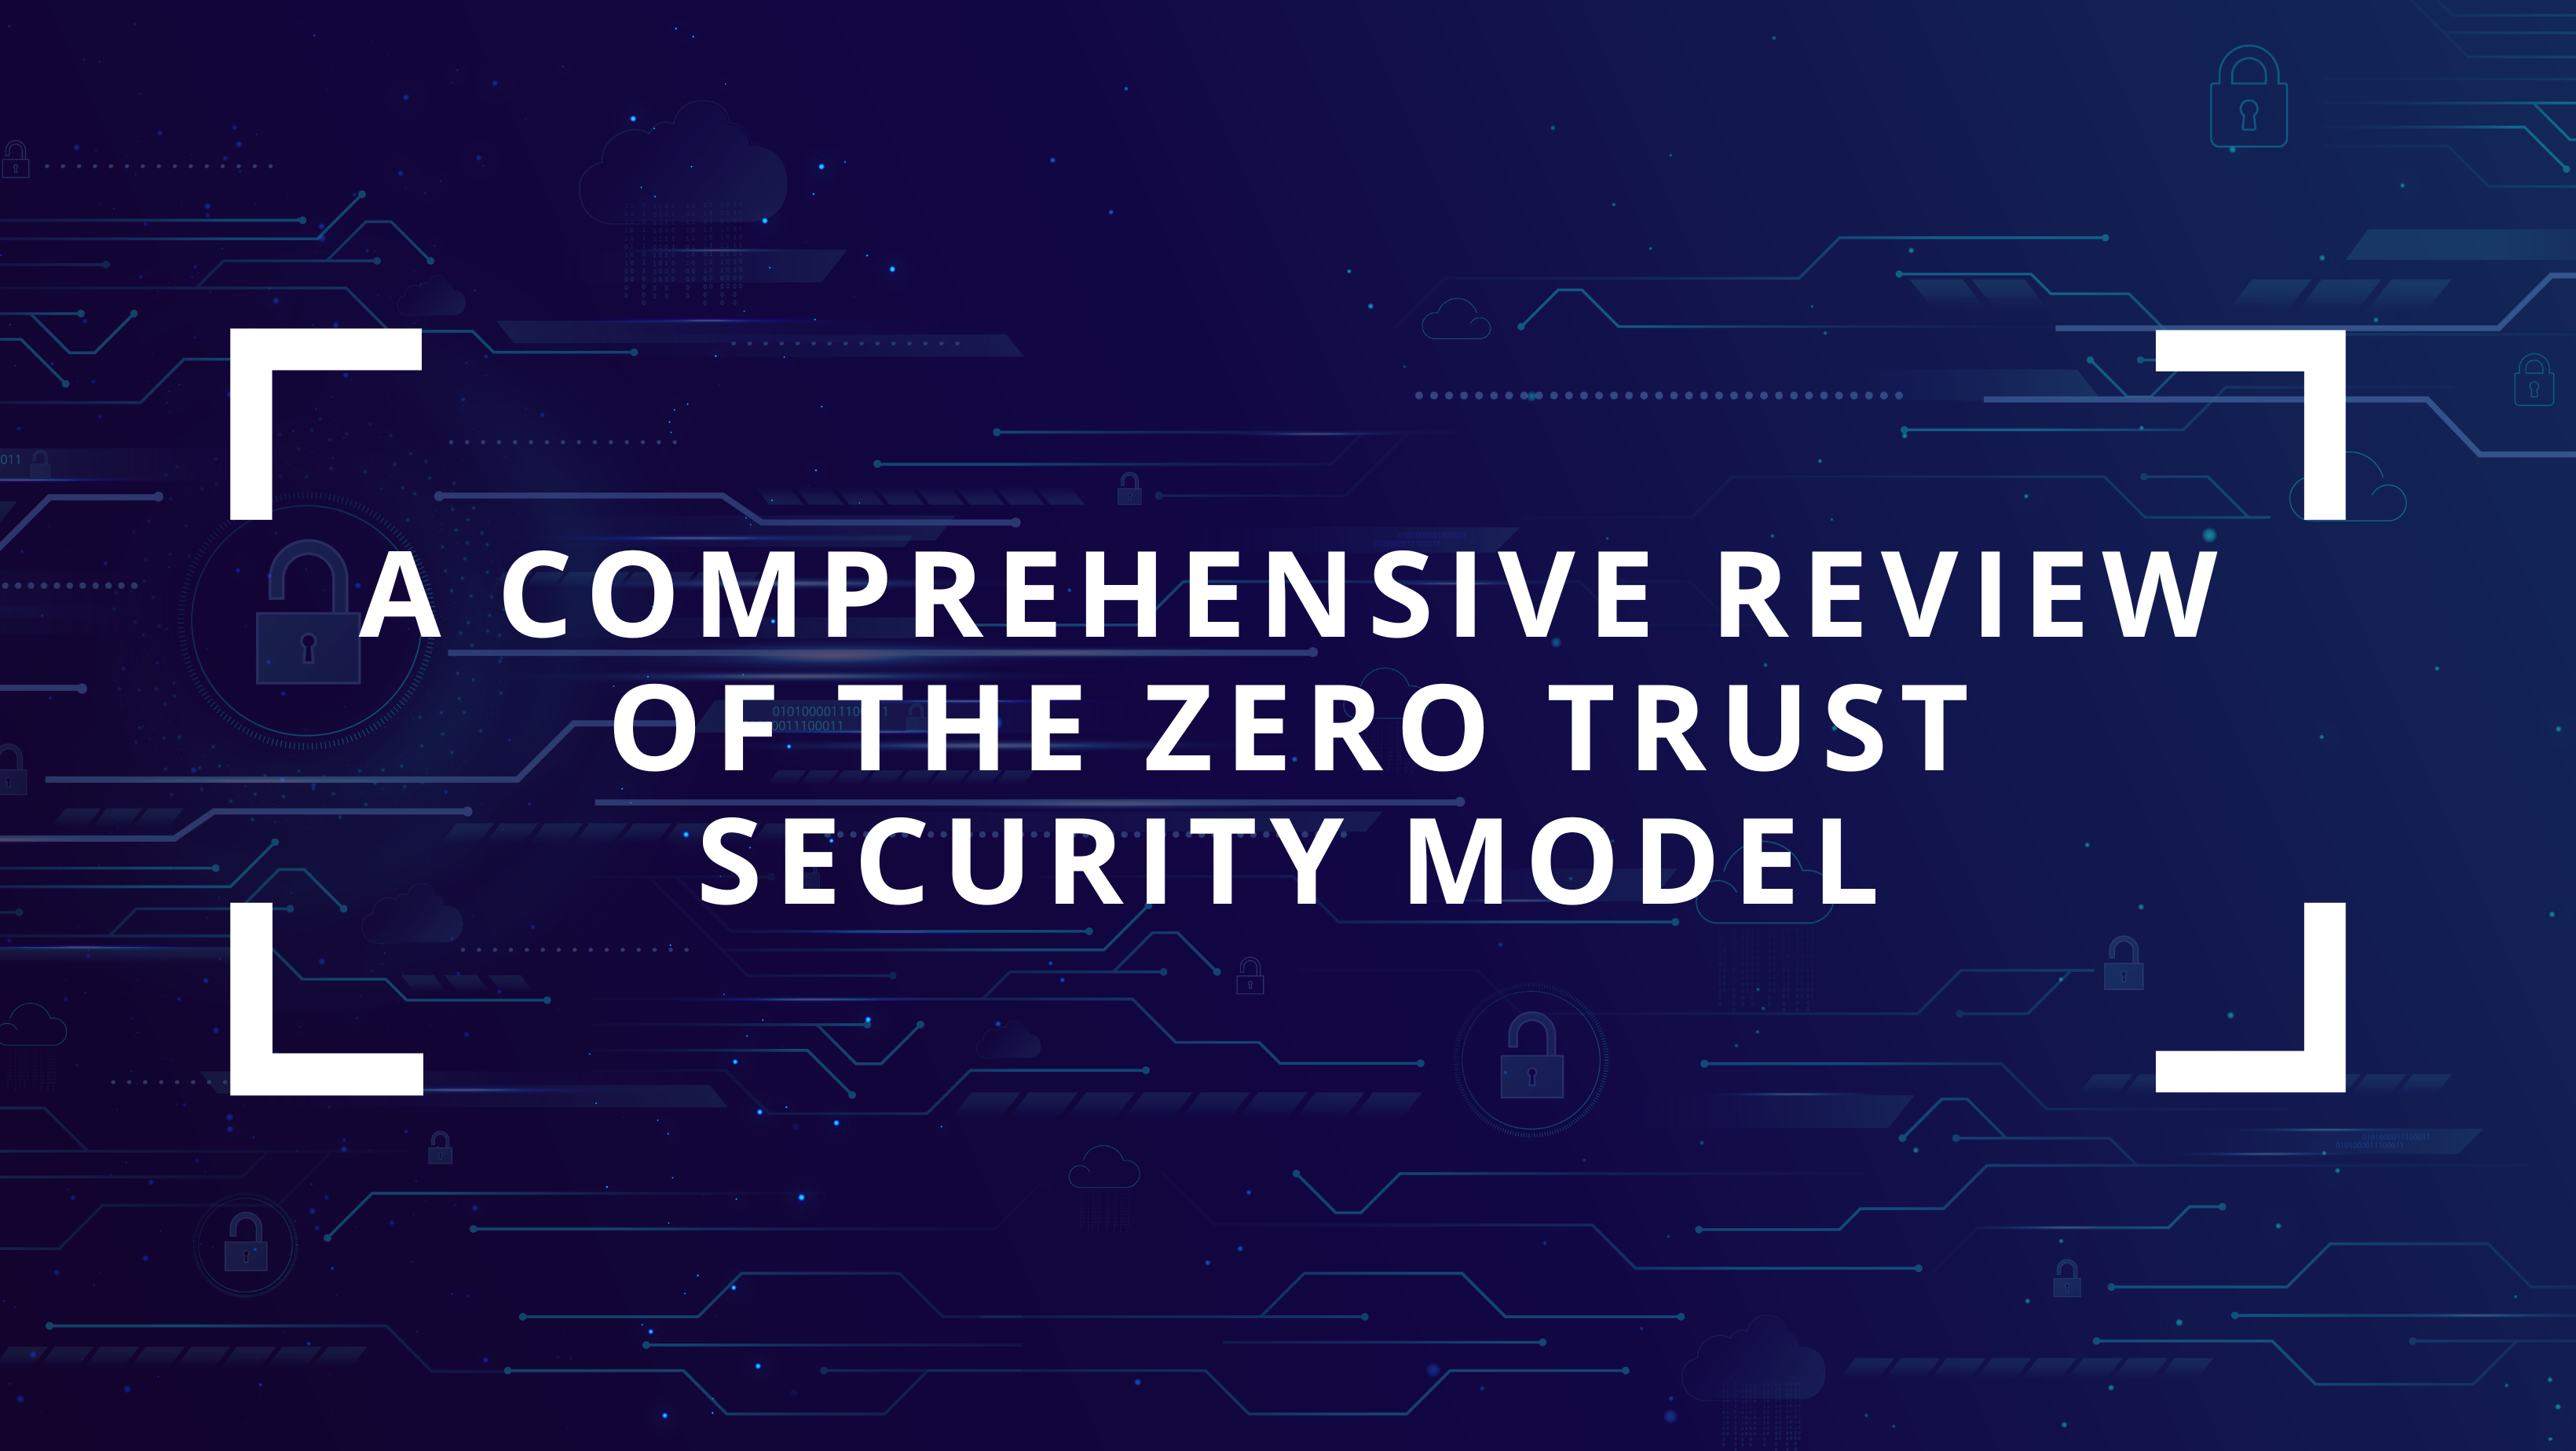 A Comprehensive Review of the Zero Trust Security Model